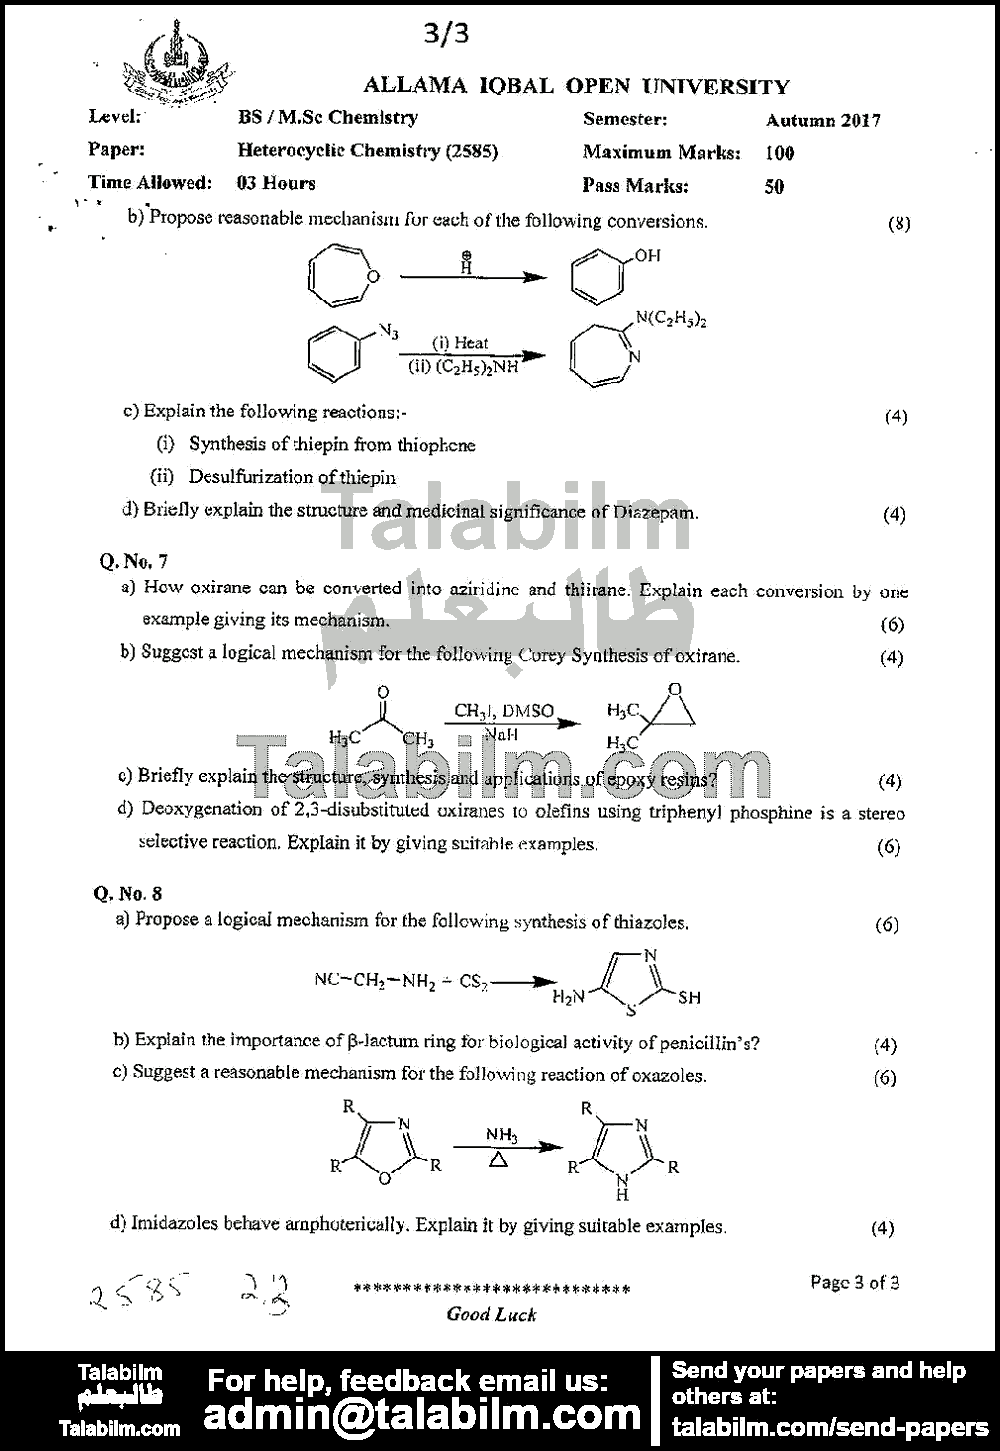 Heterocyclic Chemistry 2585 past paper for Autumn 2017 Page No. 3